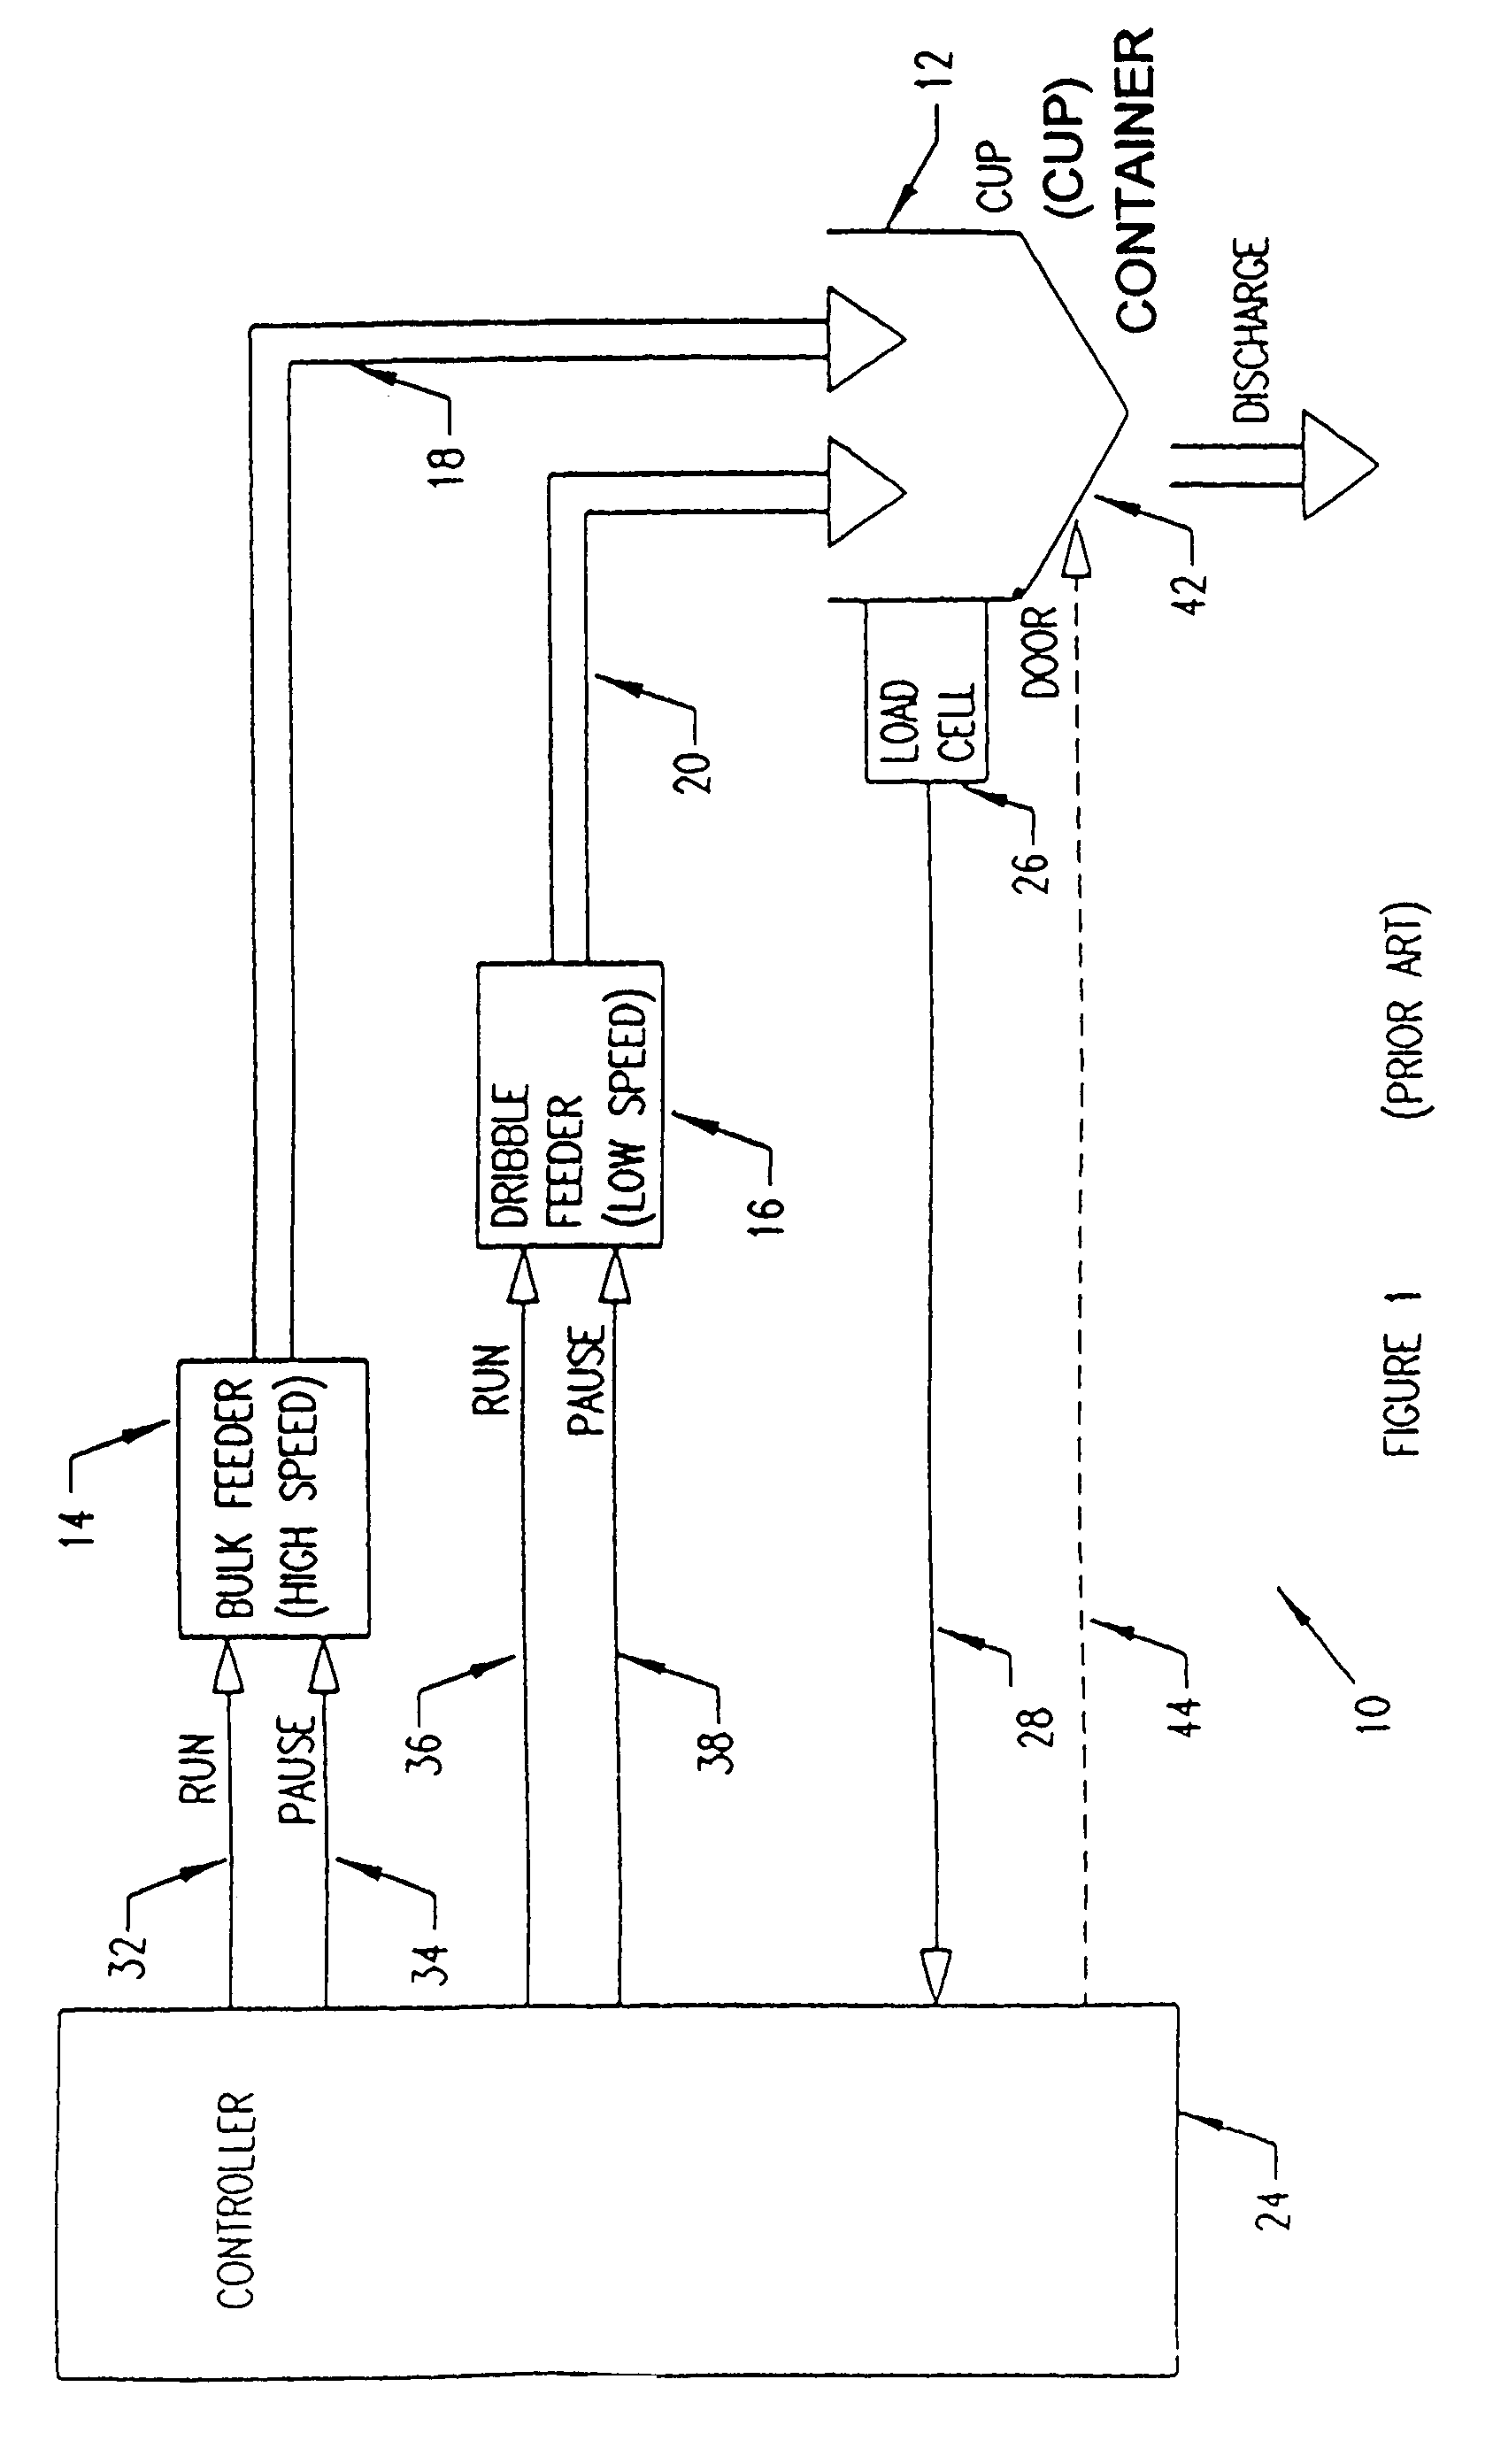 Method and apparatus for weighing fragile items